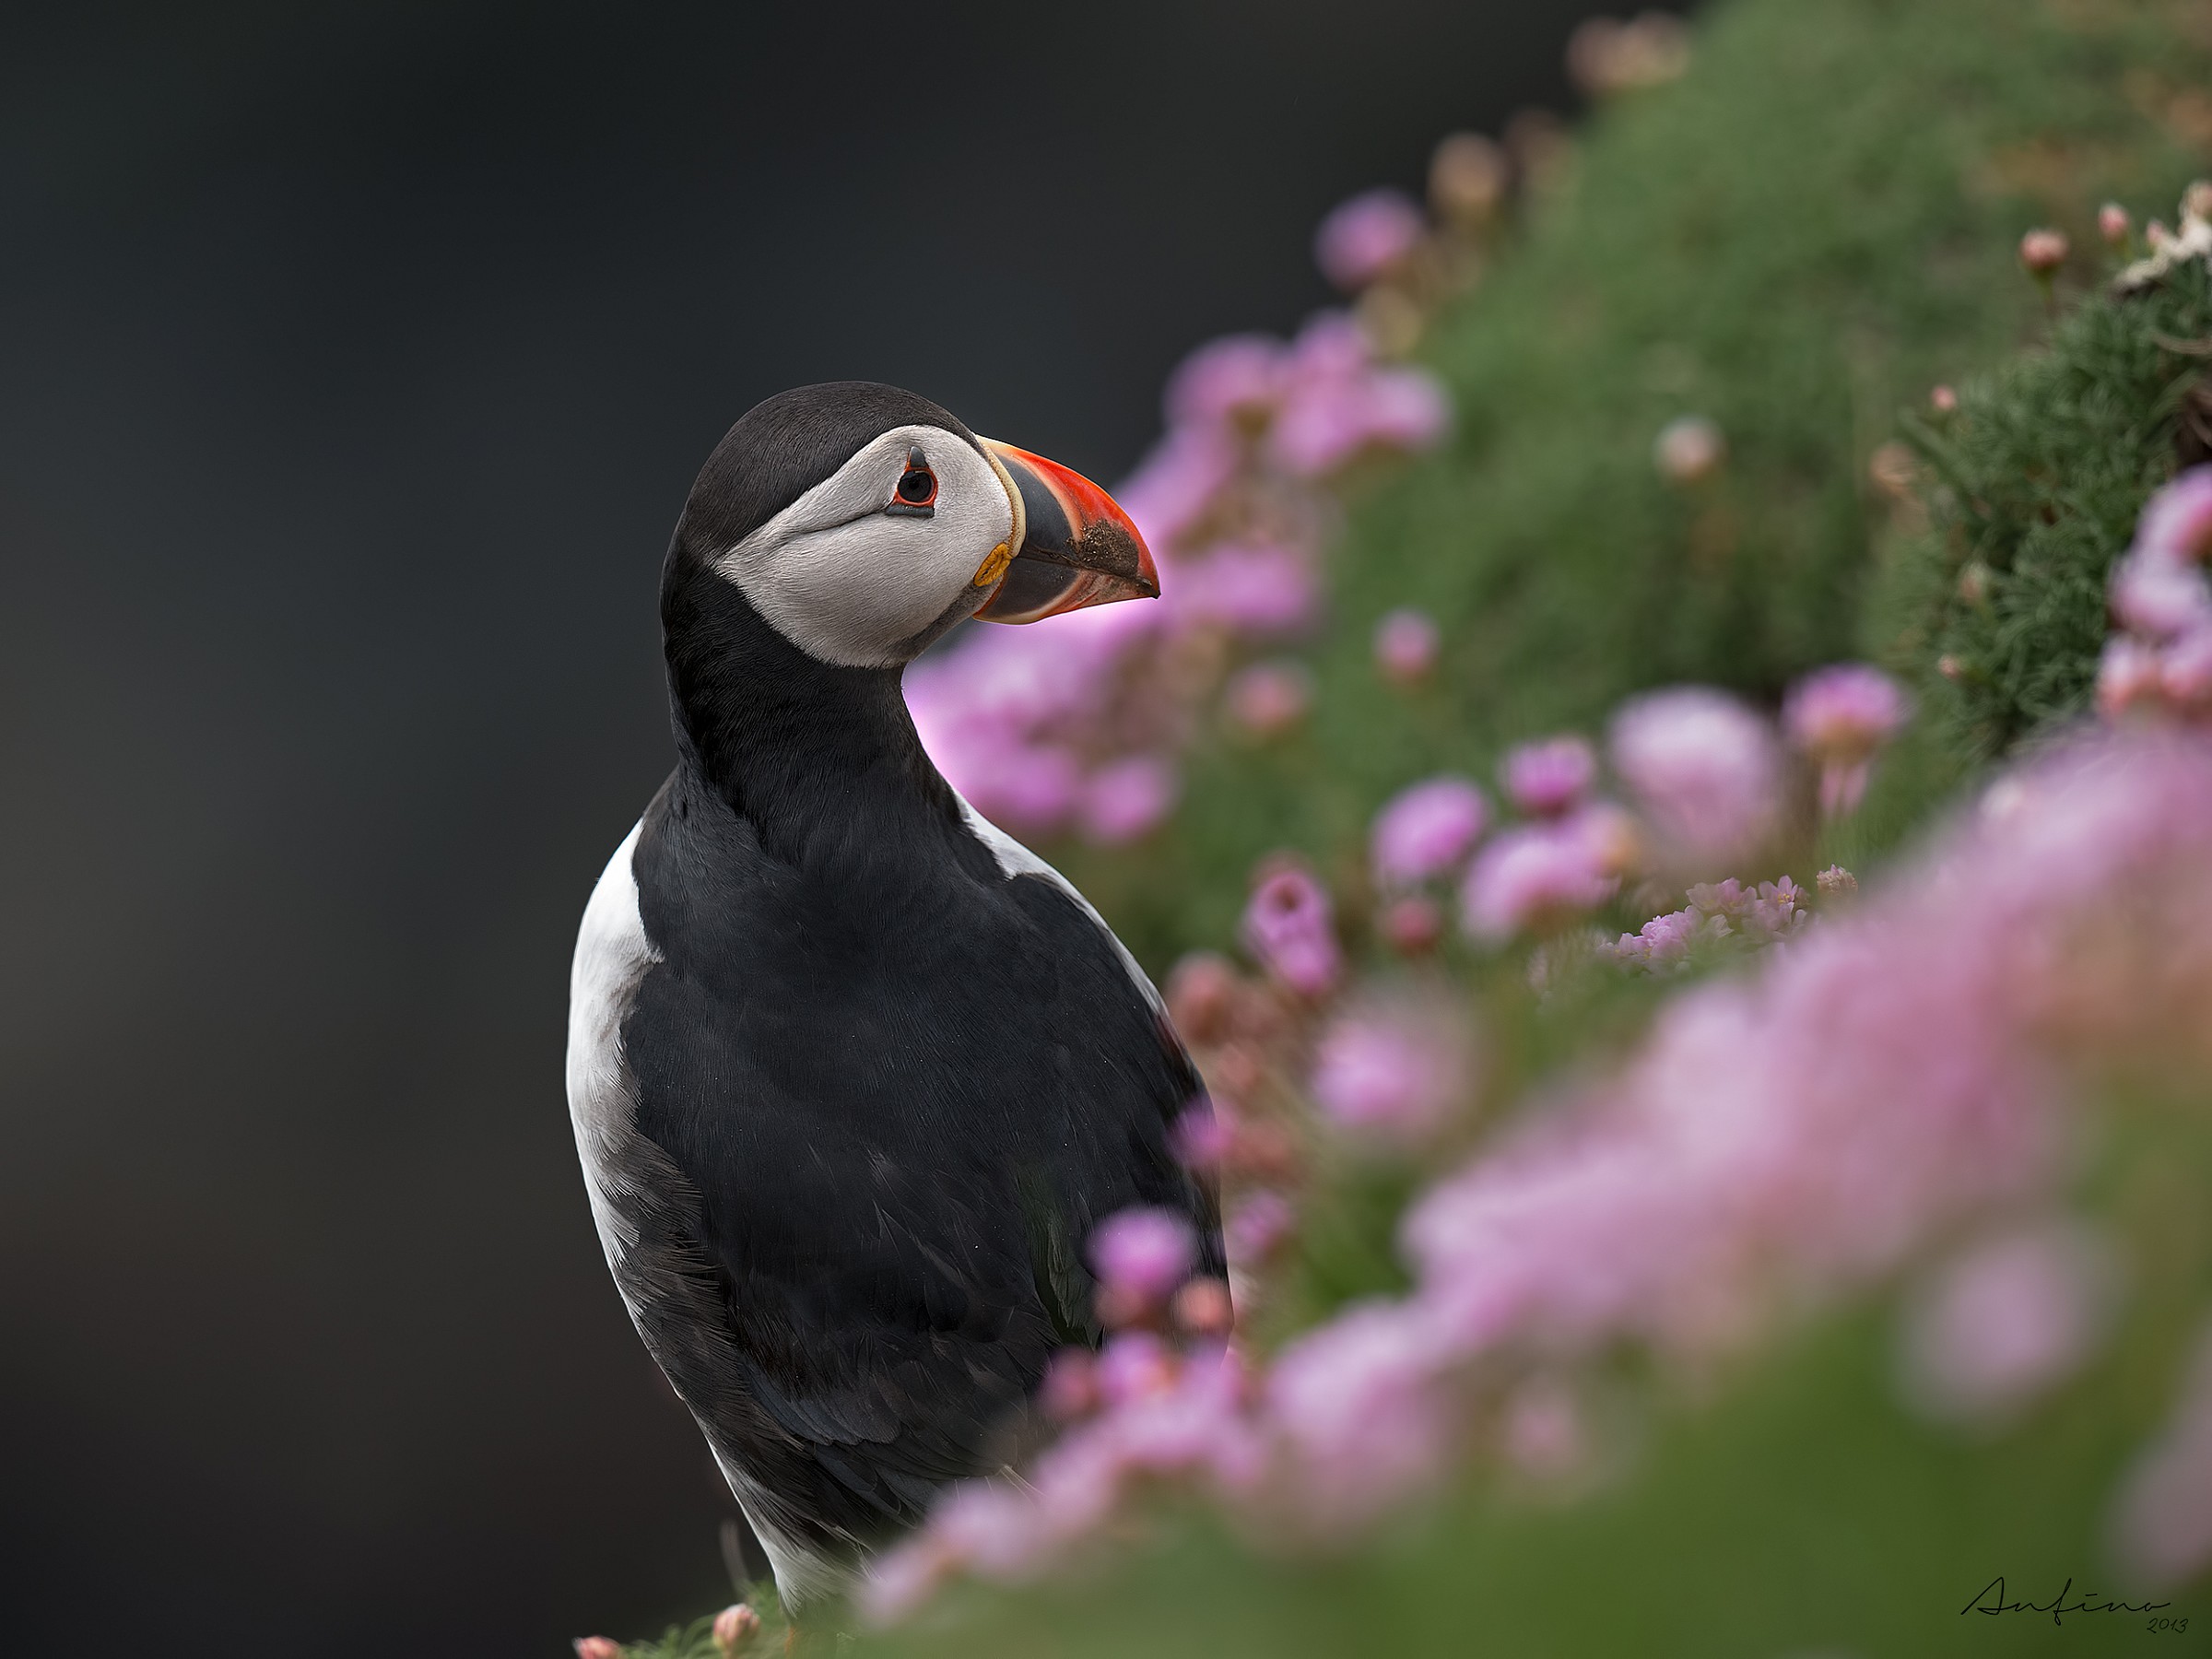 Puffin among the flowers...